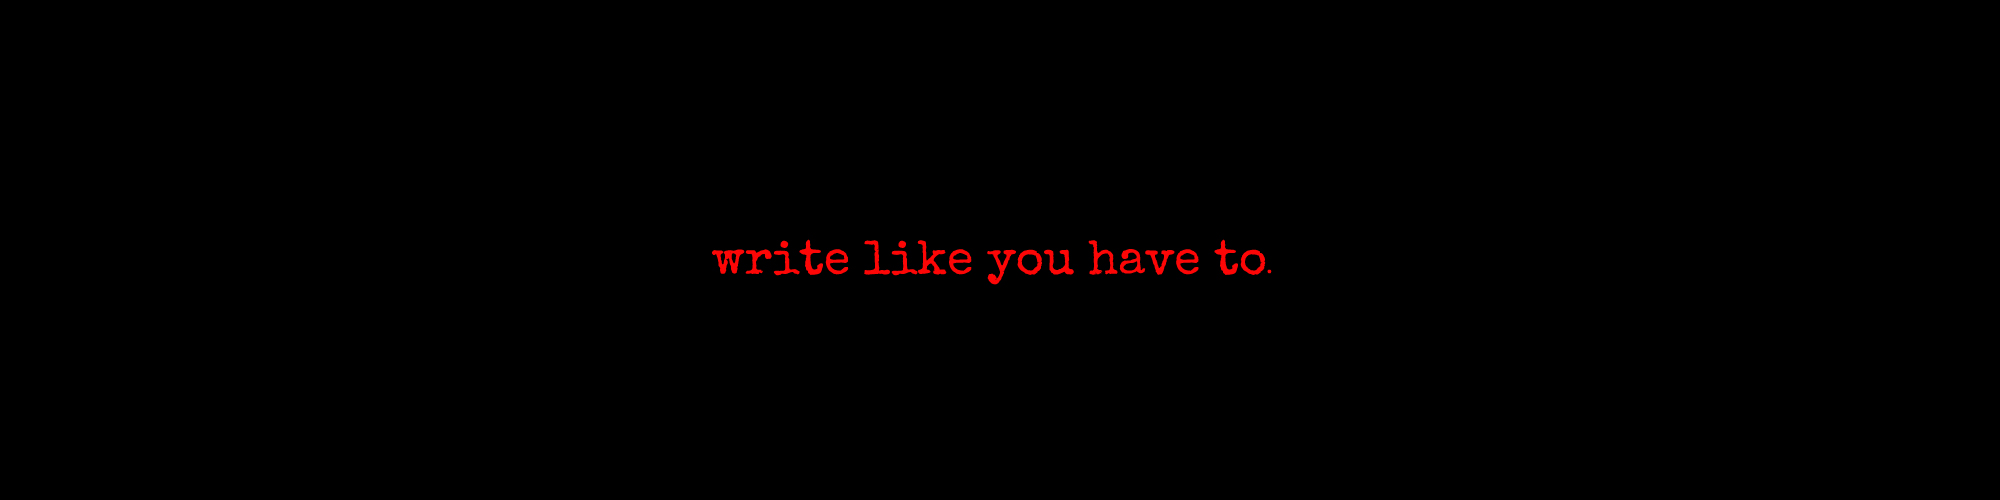 write-like-you-have-to